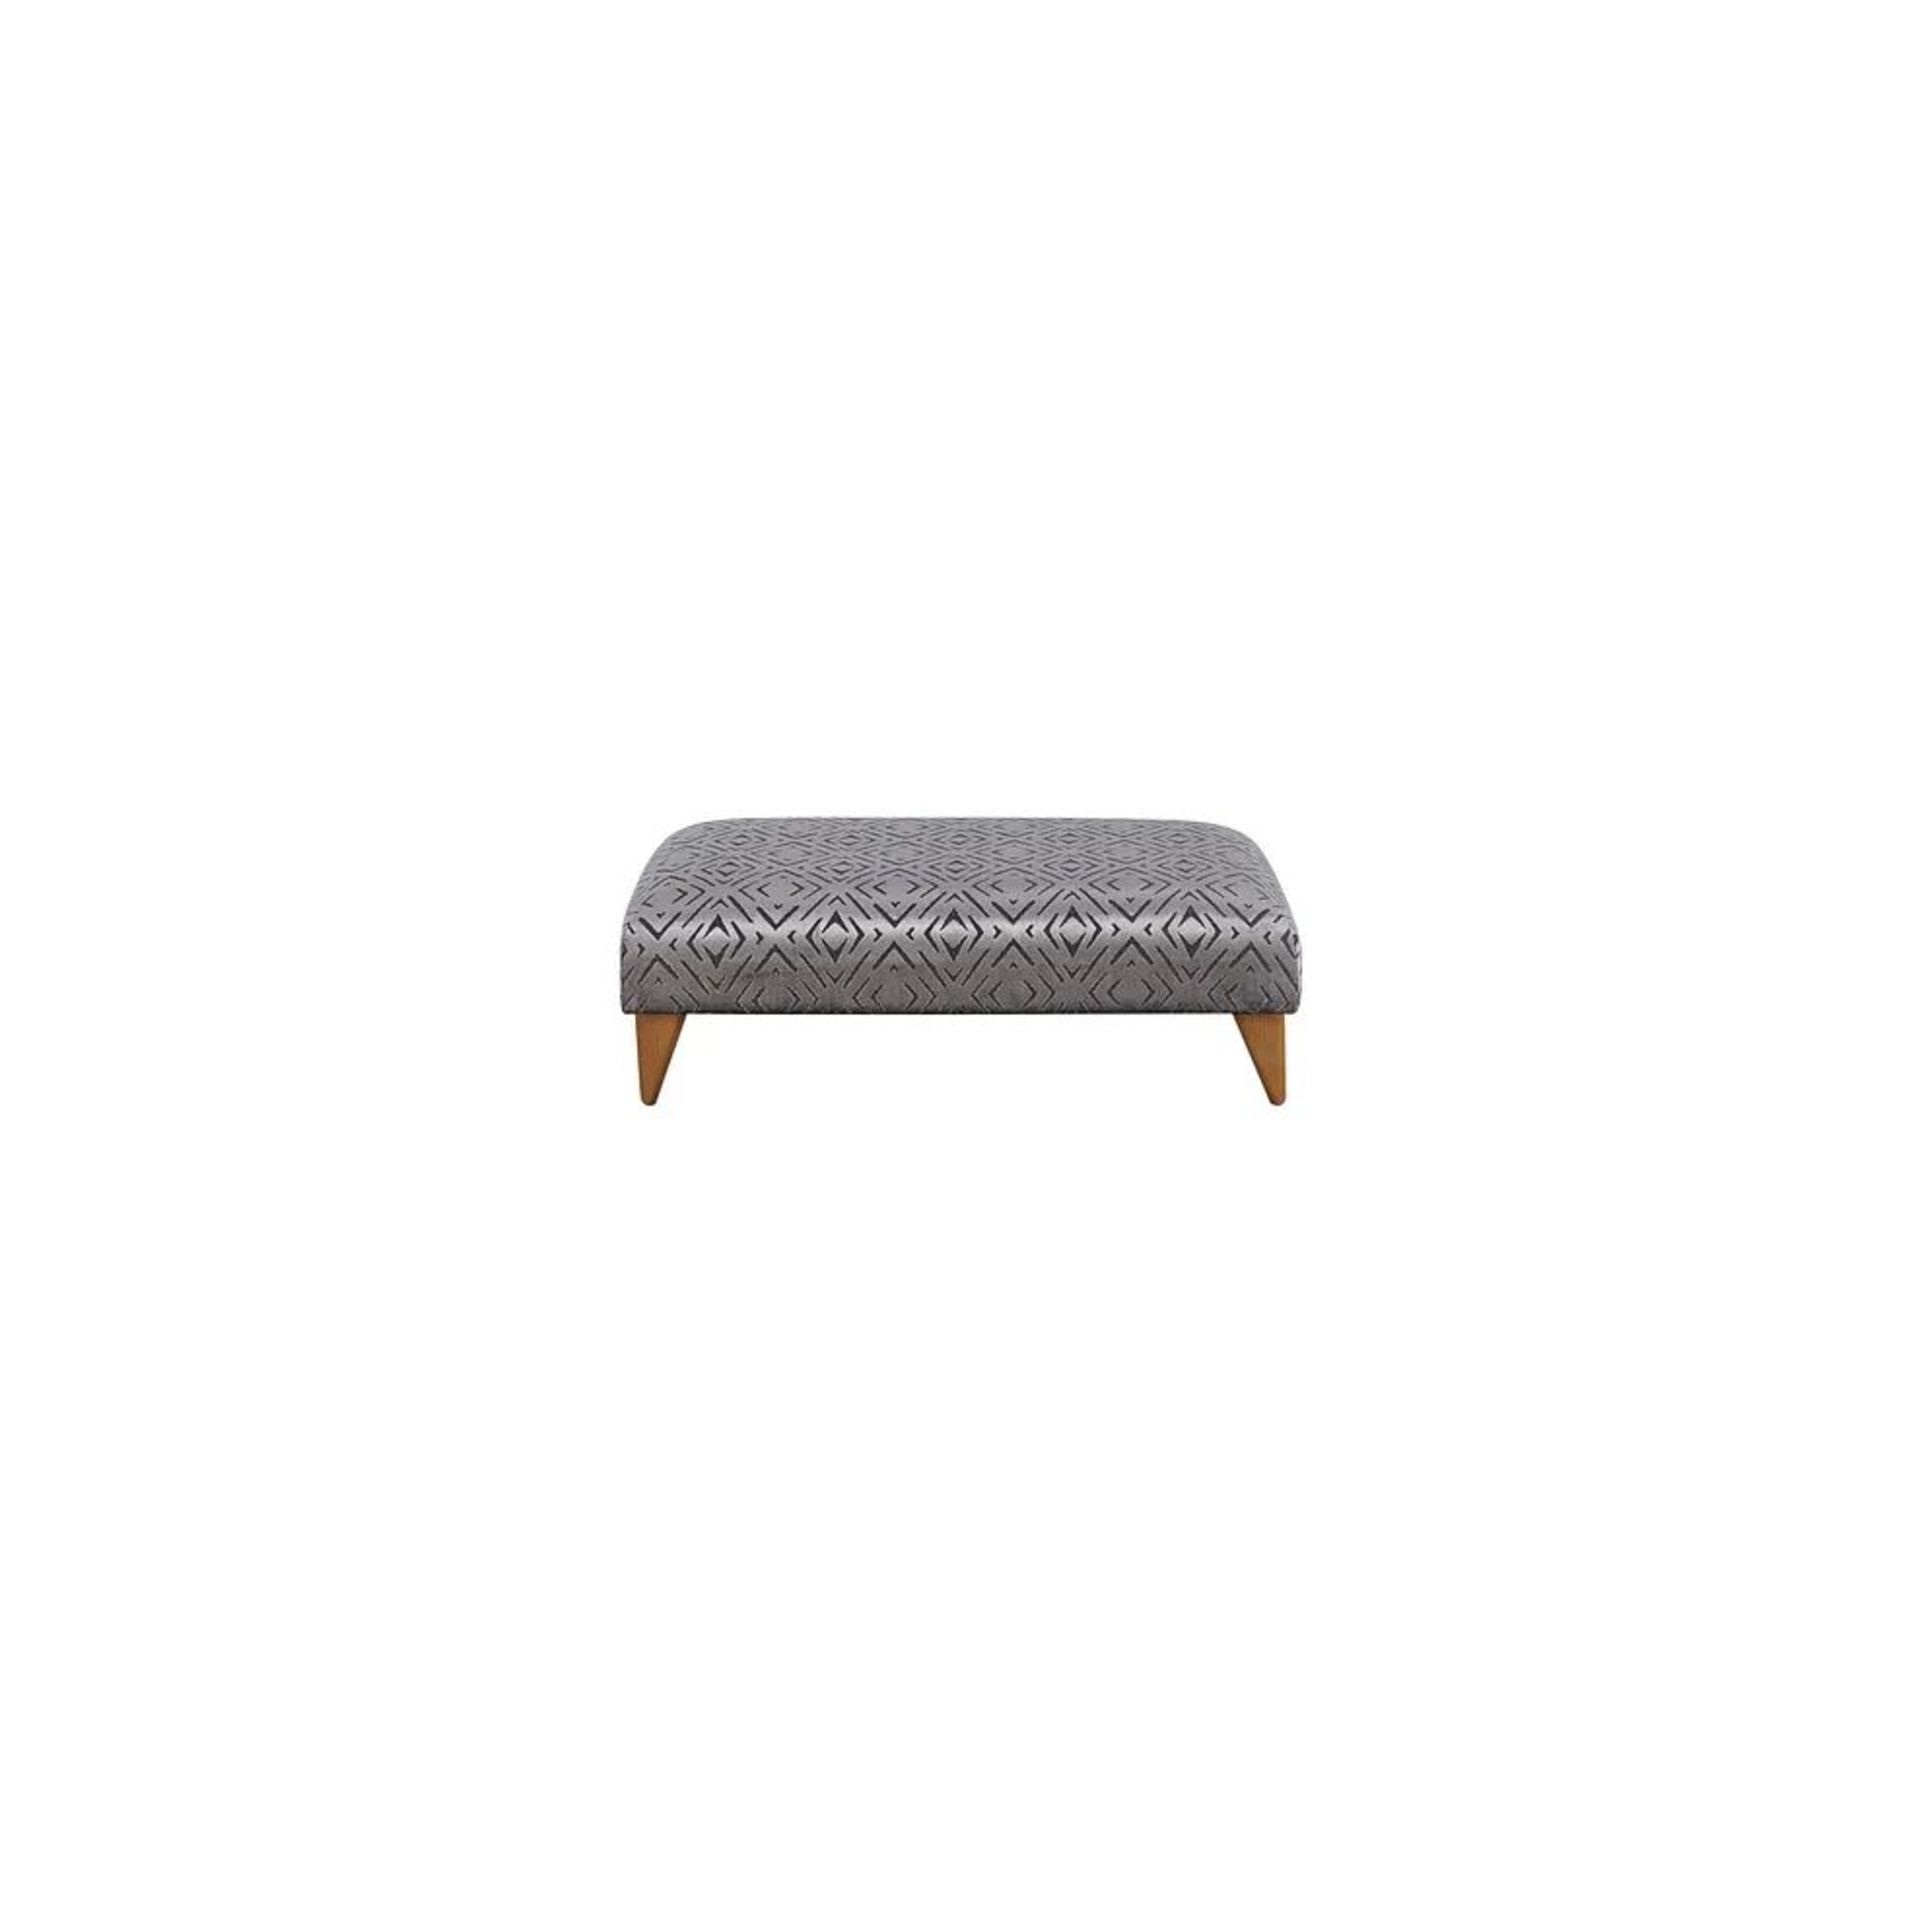 BRAND NEW JASMINE Footstool - KHALIFA STEEL FABRIC. RRP £349. Built with a sturdy hardwood frame and - Image 2 of 5